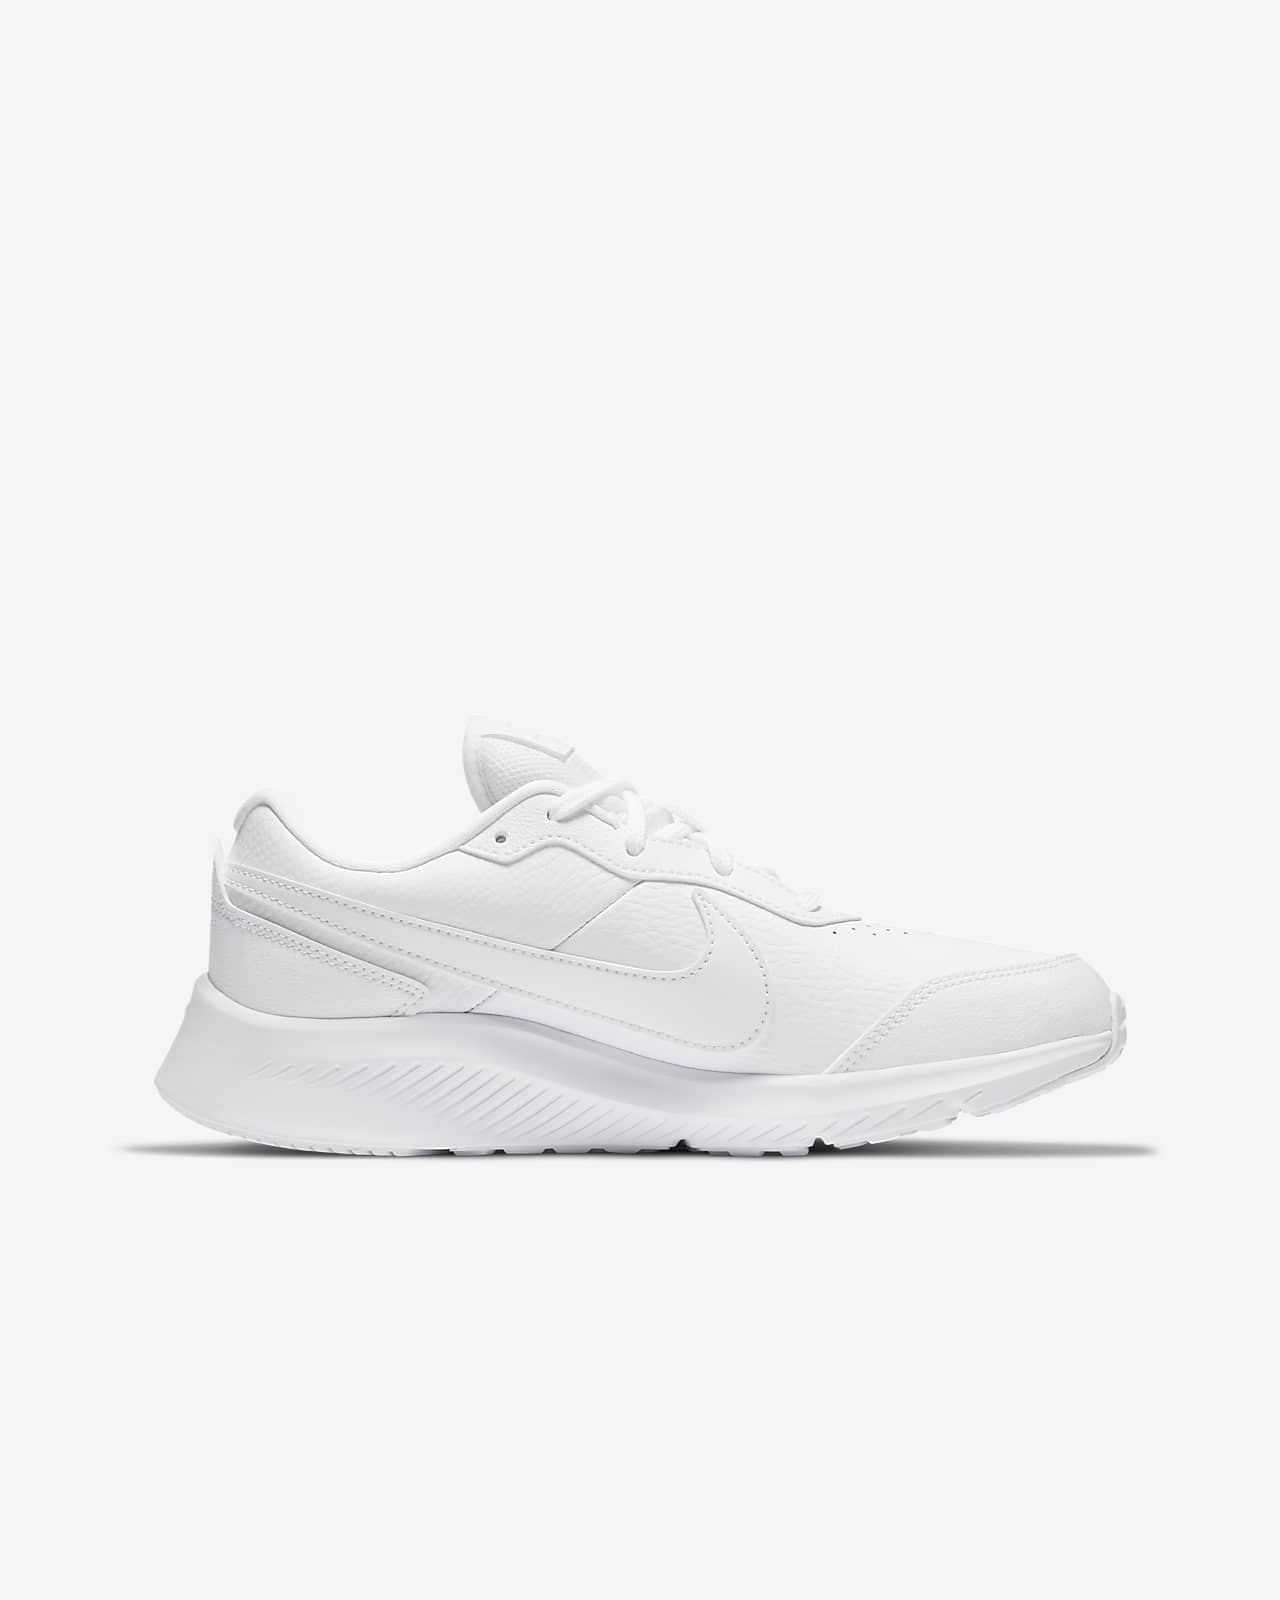 nike white leather shoes